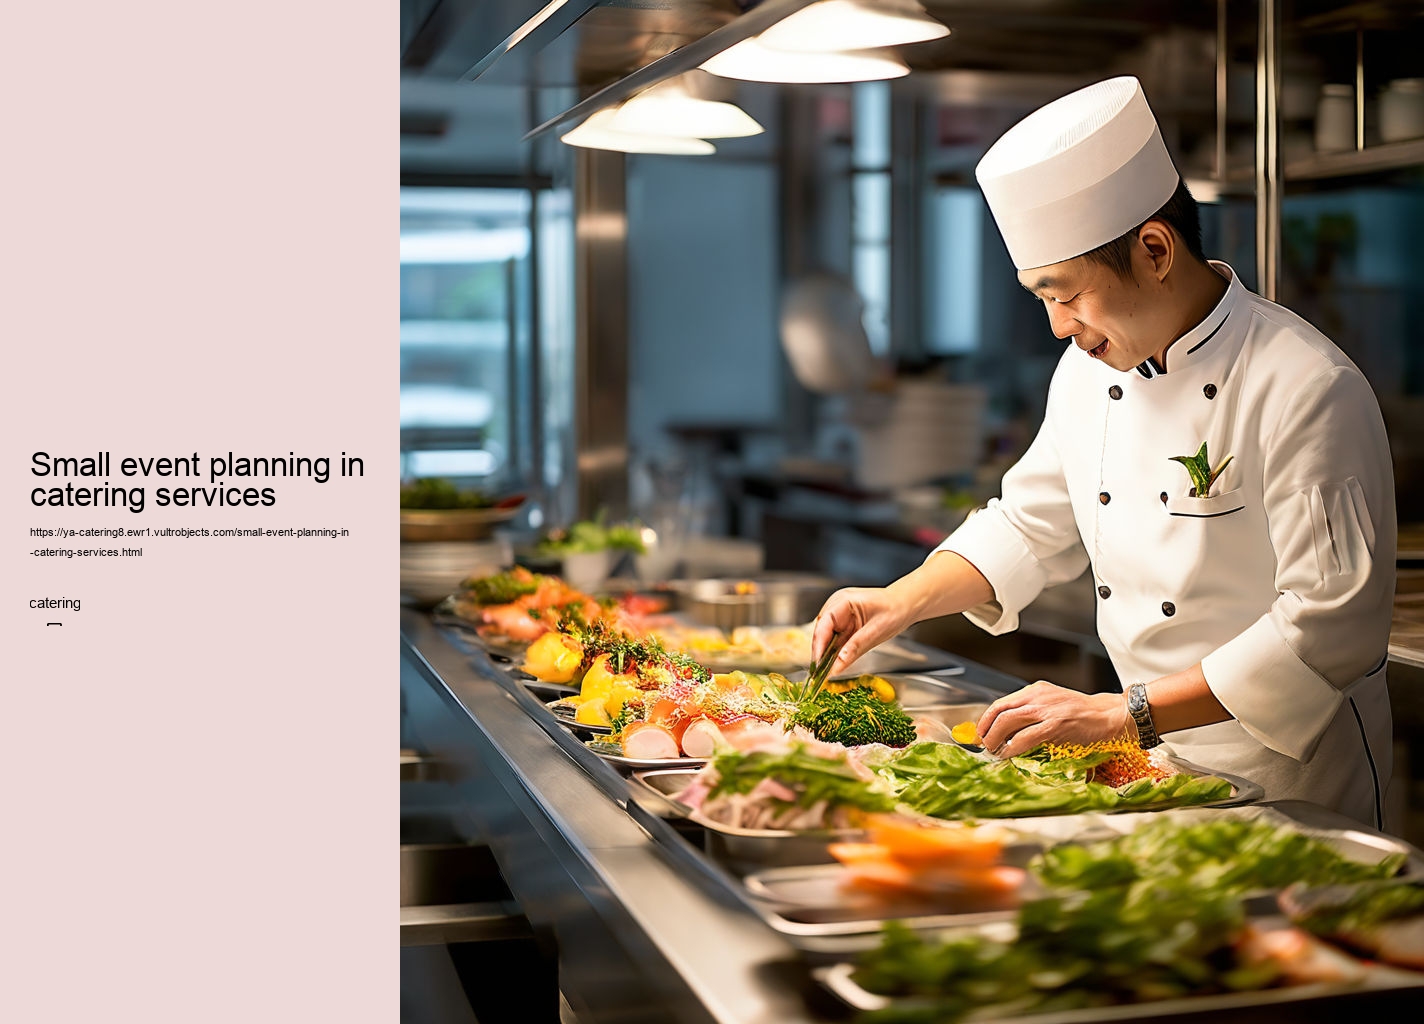 Small event planning in catering services